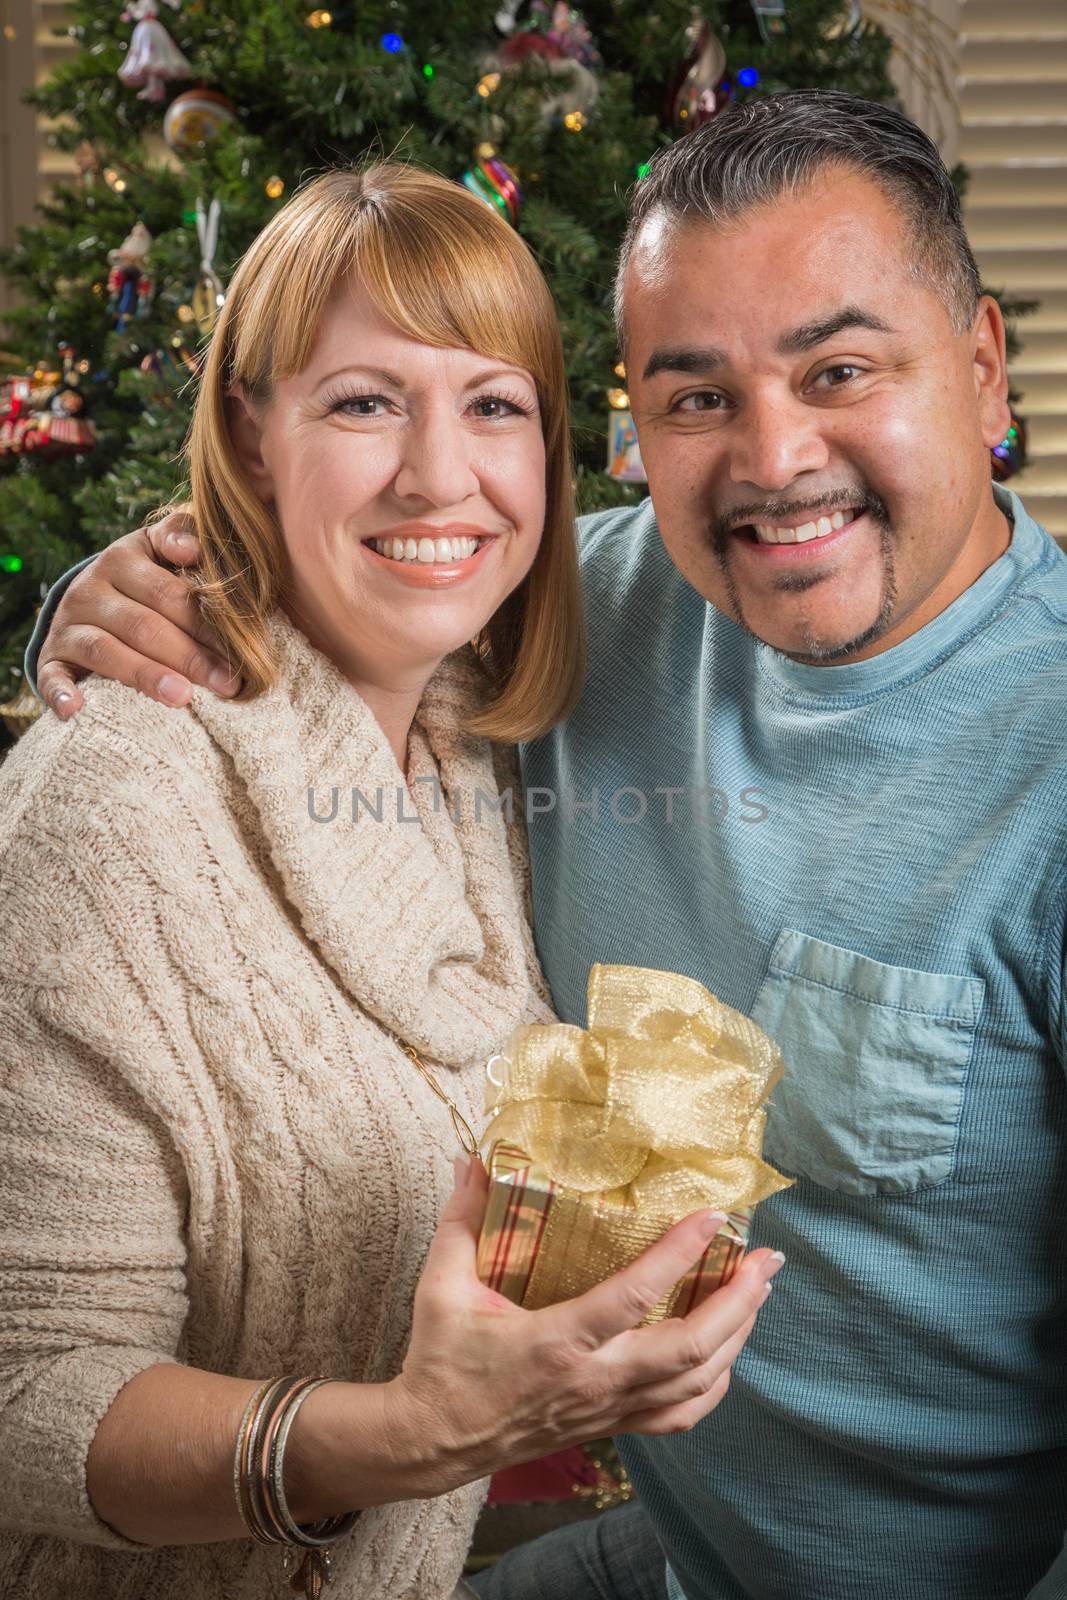 Young Mixed Race Couple with Present Near Christmas Tree by Feverpitched